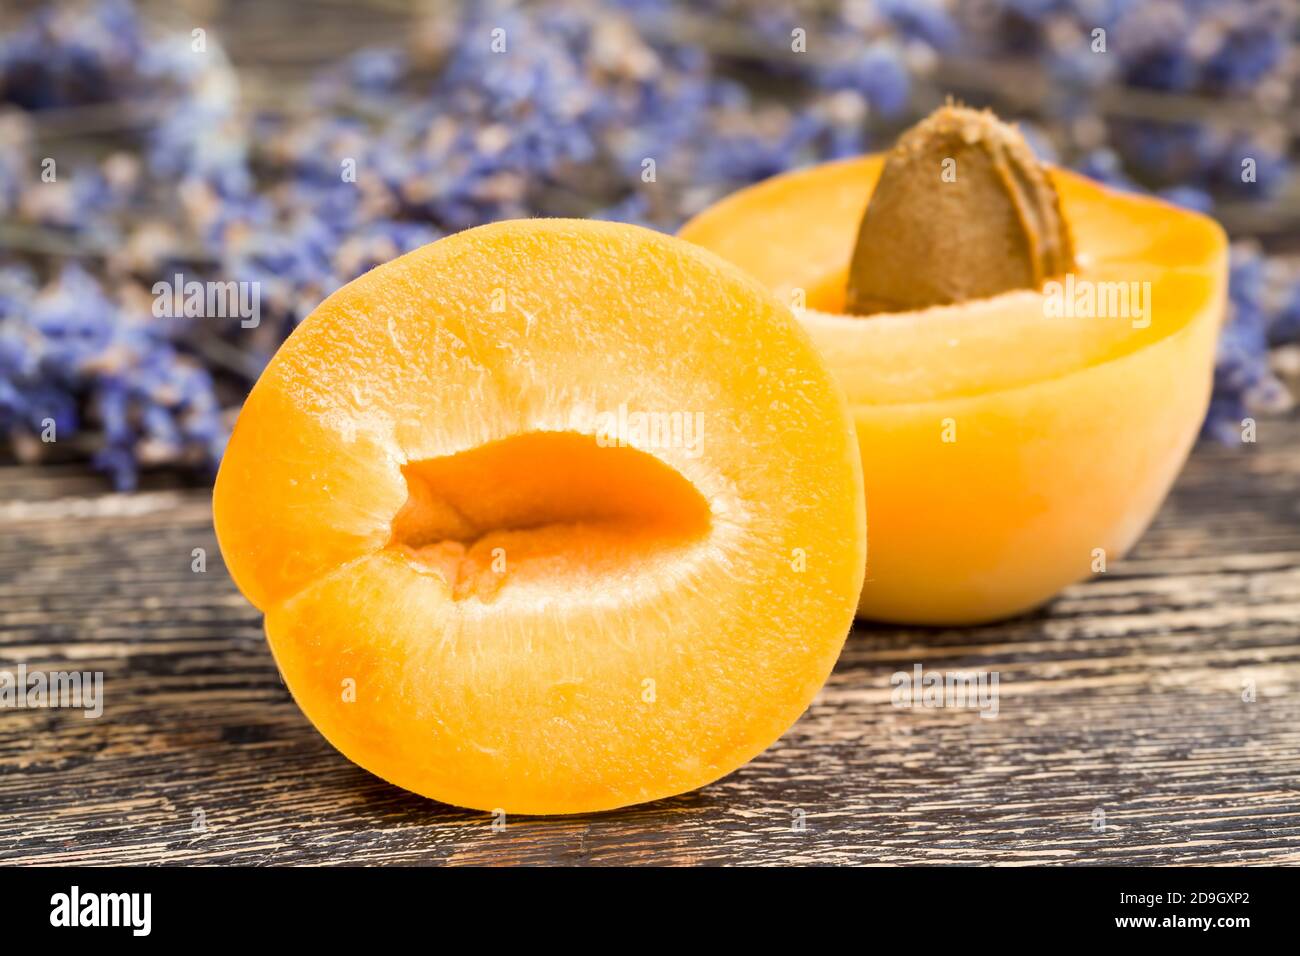 natural lavender flowers and slices of orange apricots Stock Photo